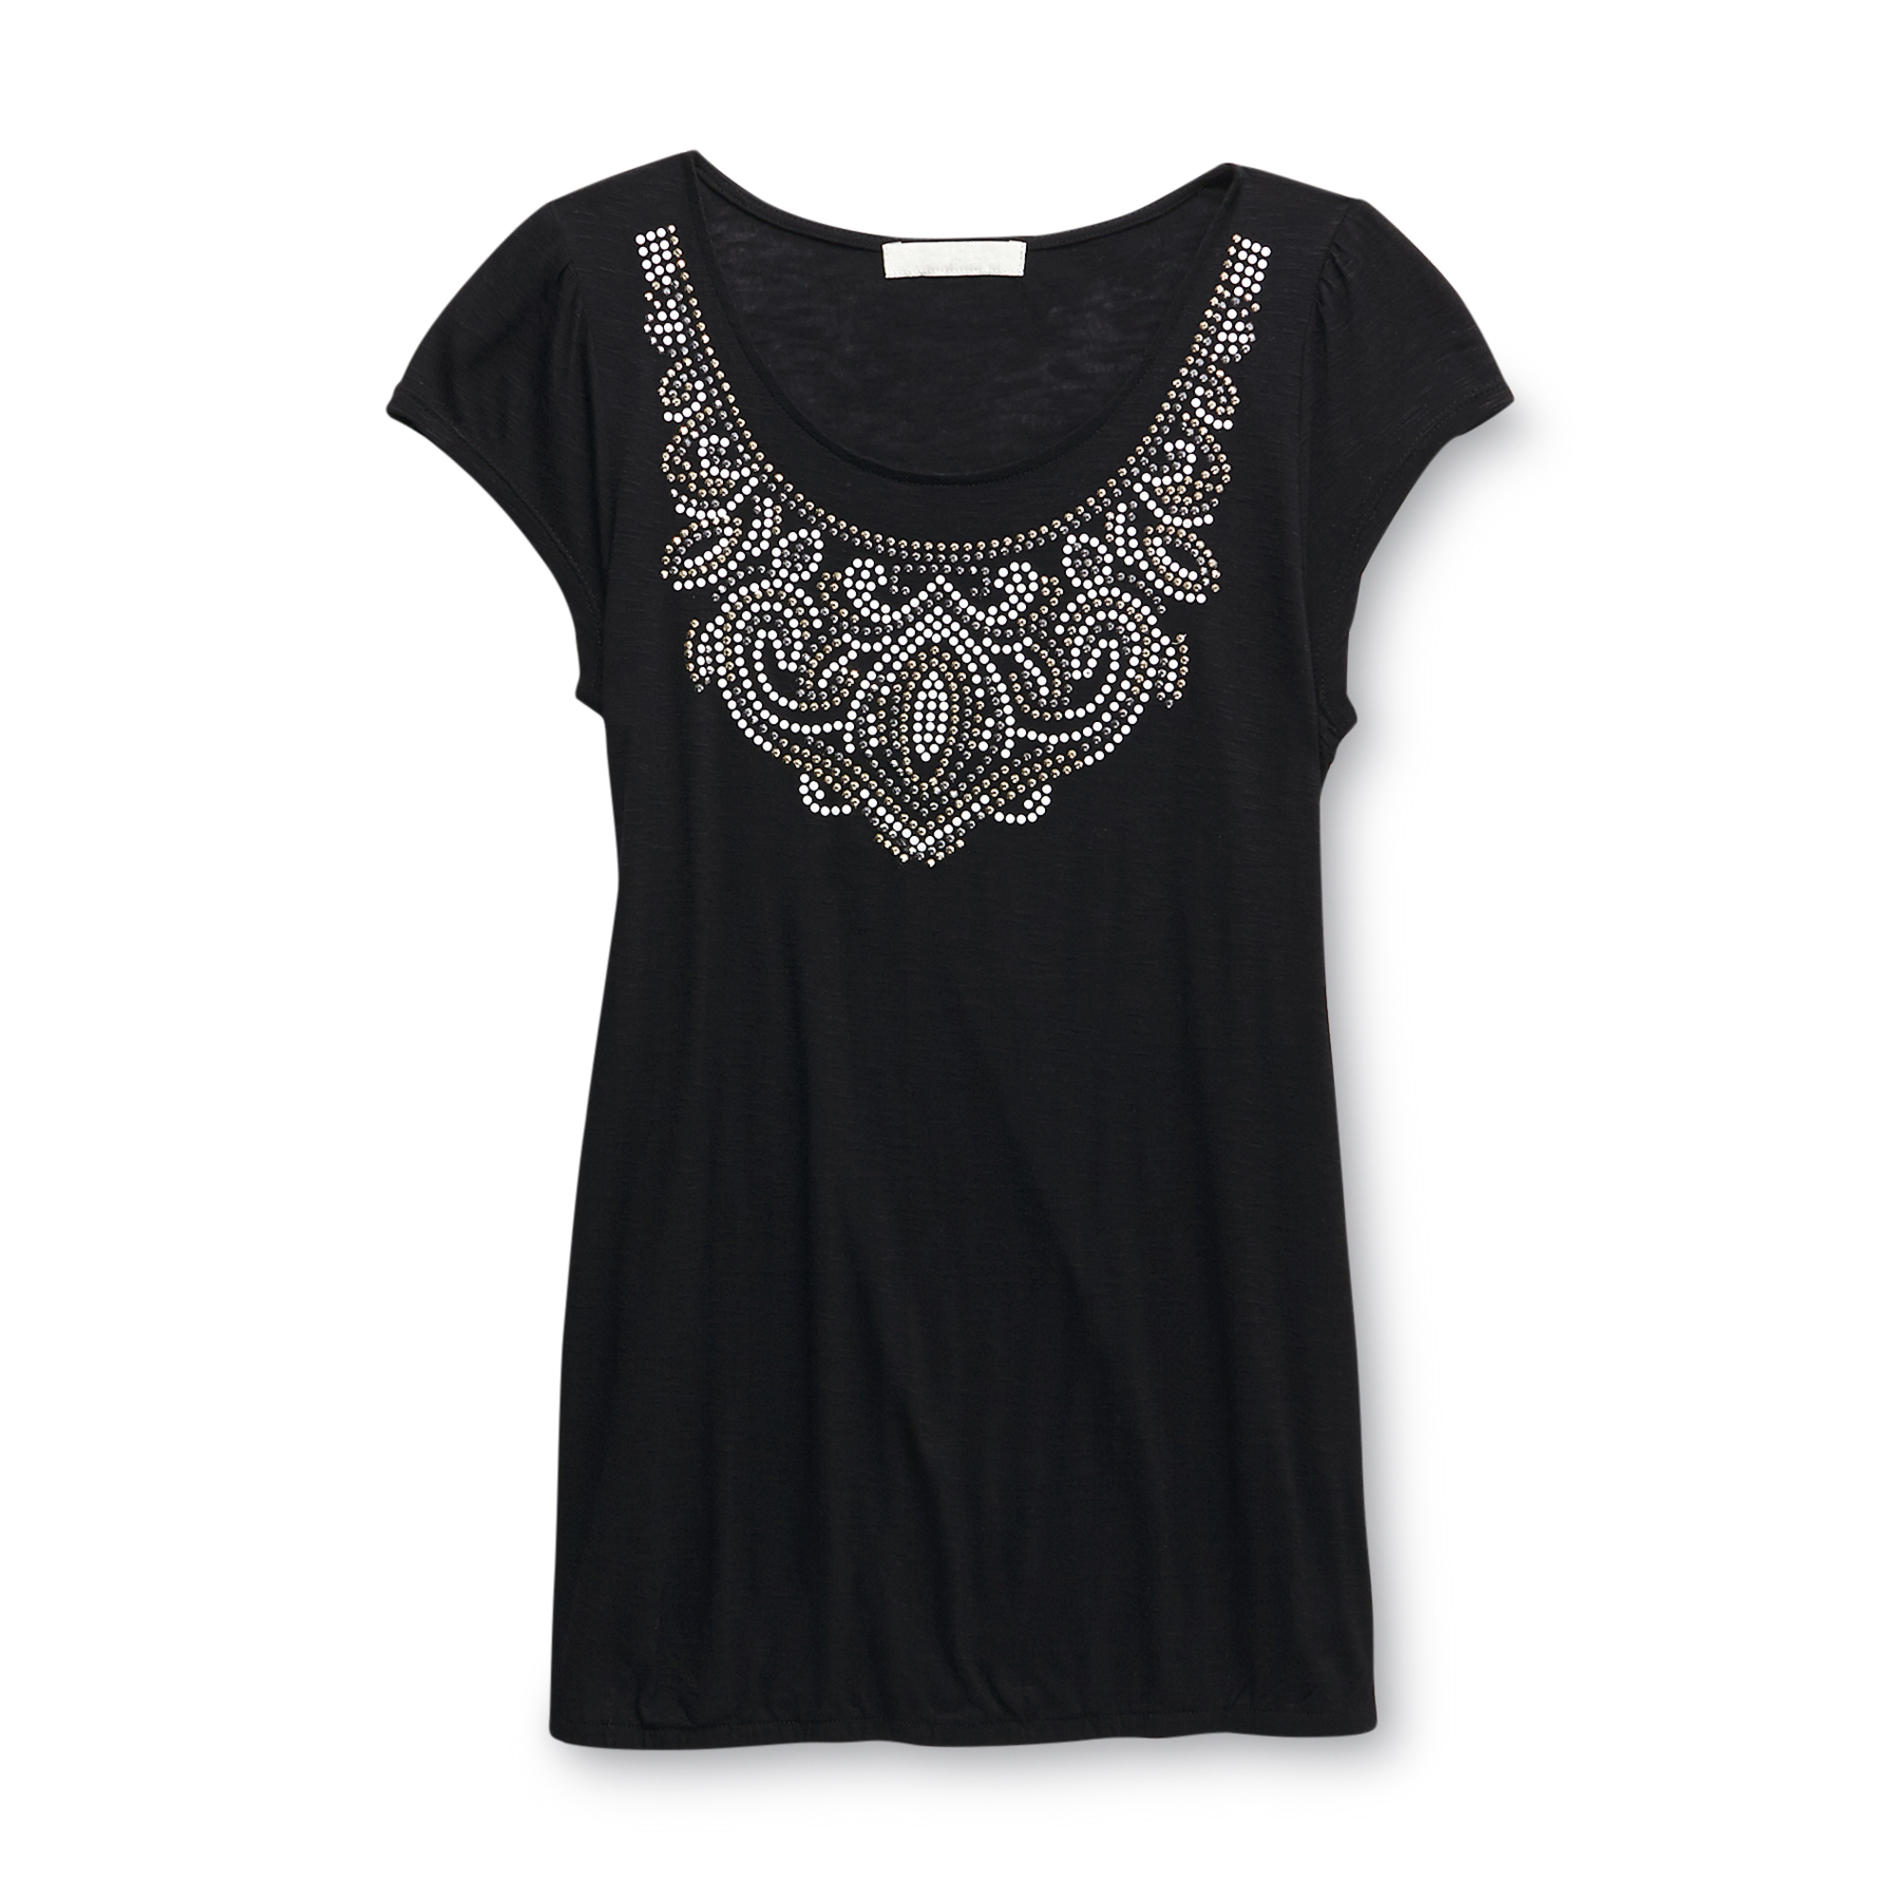 Canyon River Blues Women's Embellished Top